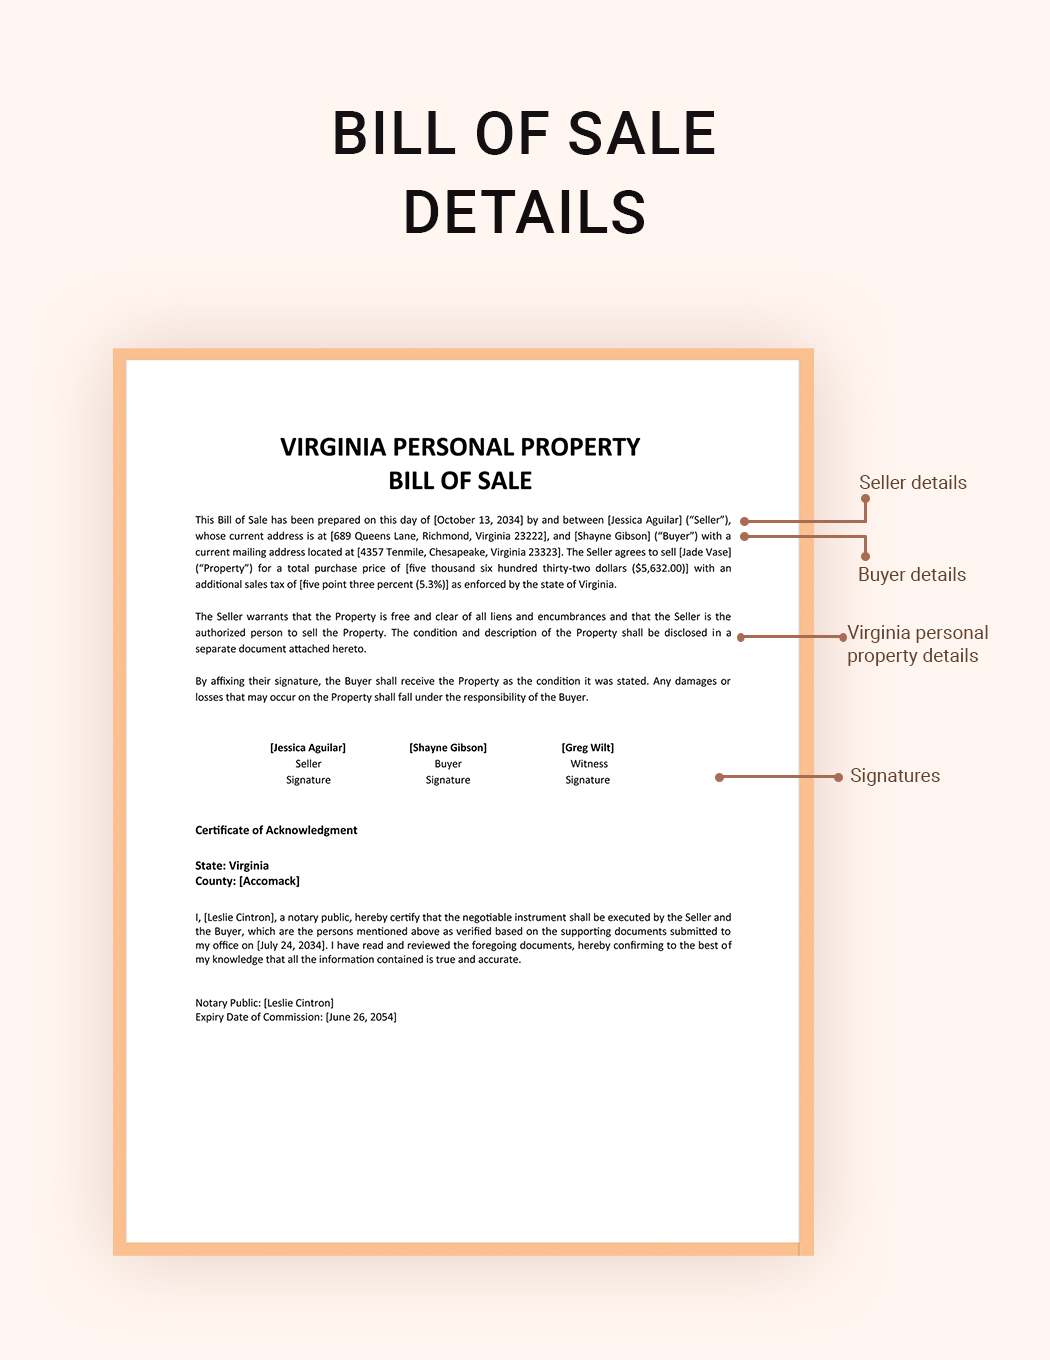 Virginia Personal Property Bill Of Sale Template Download in Word